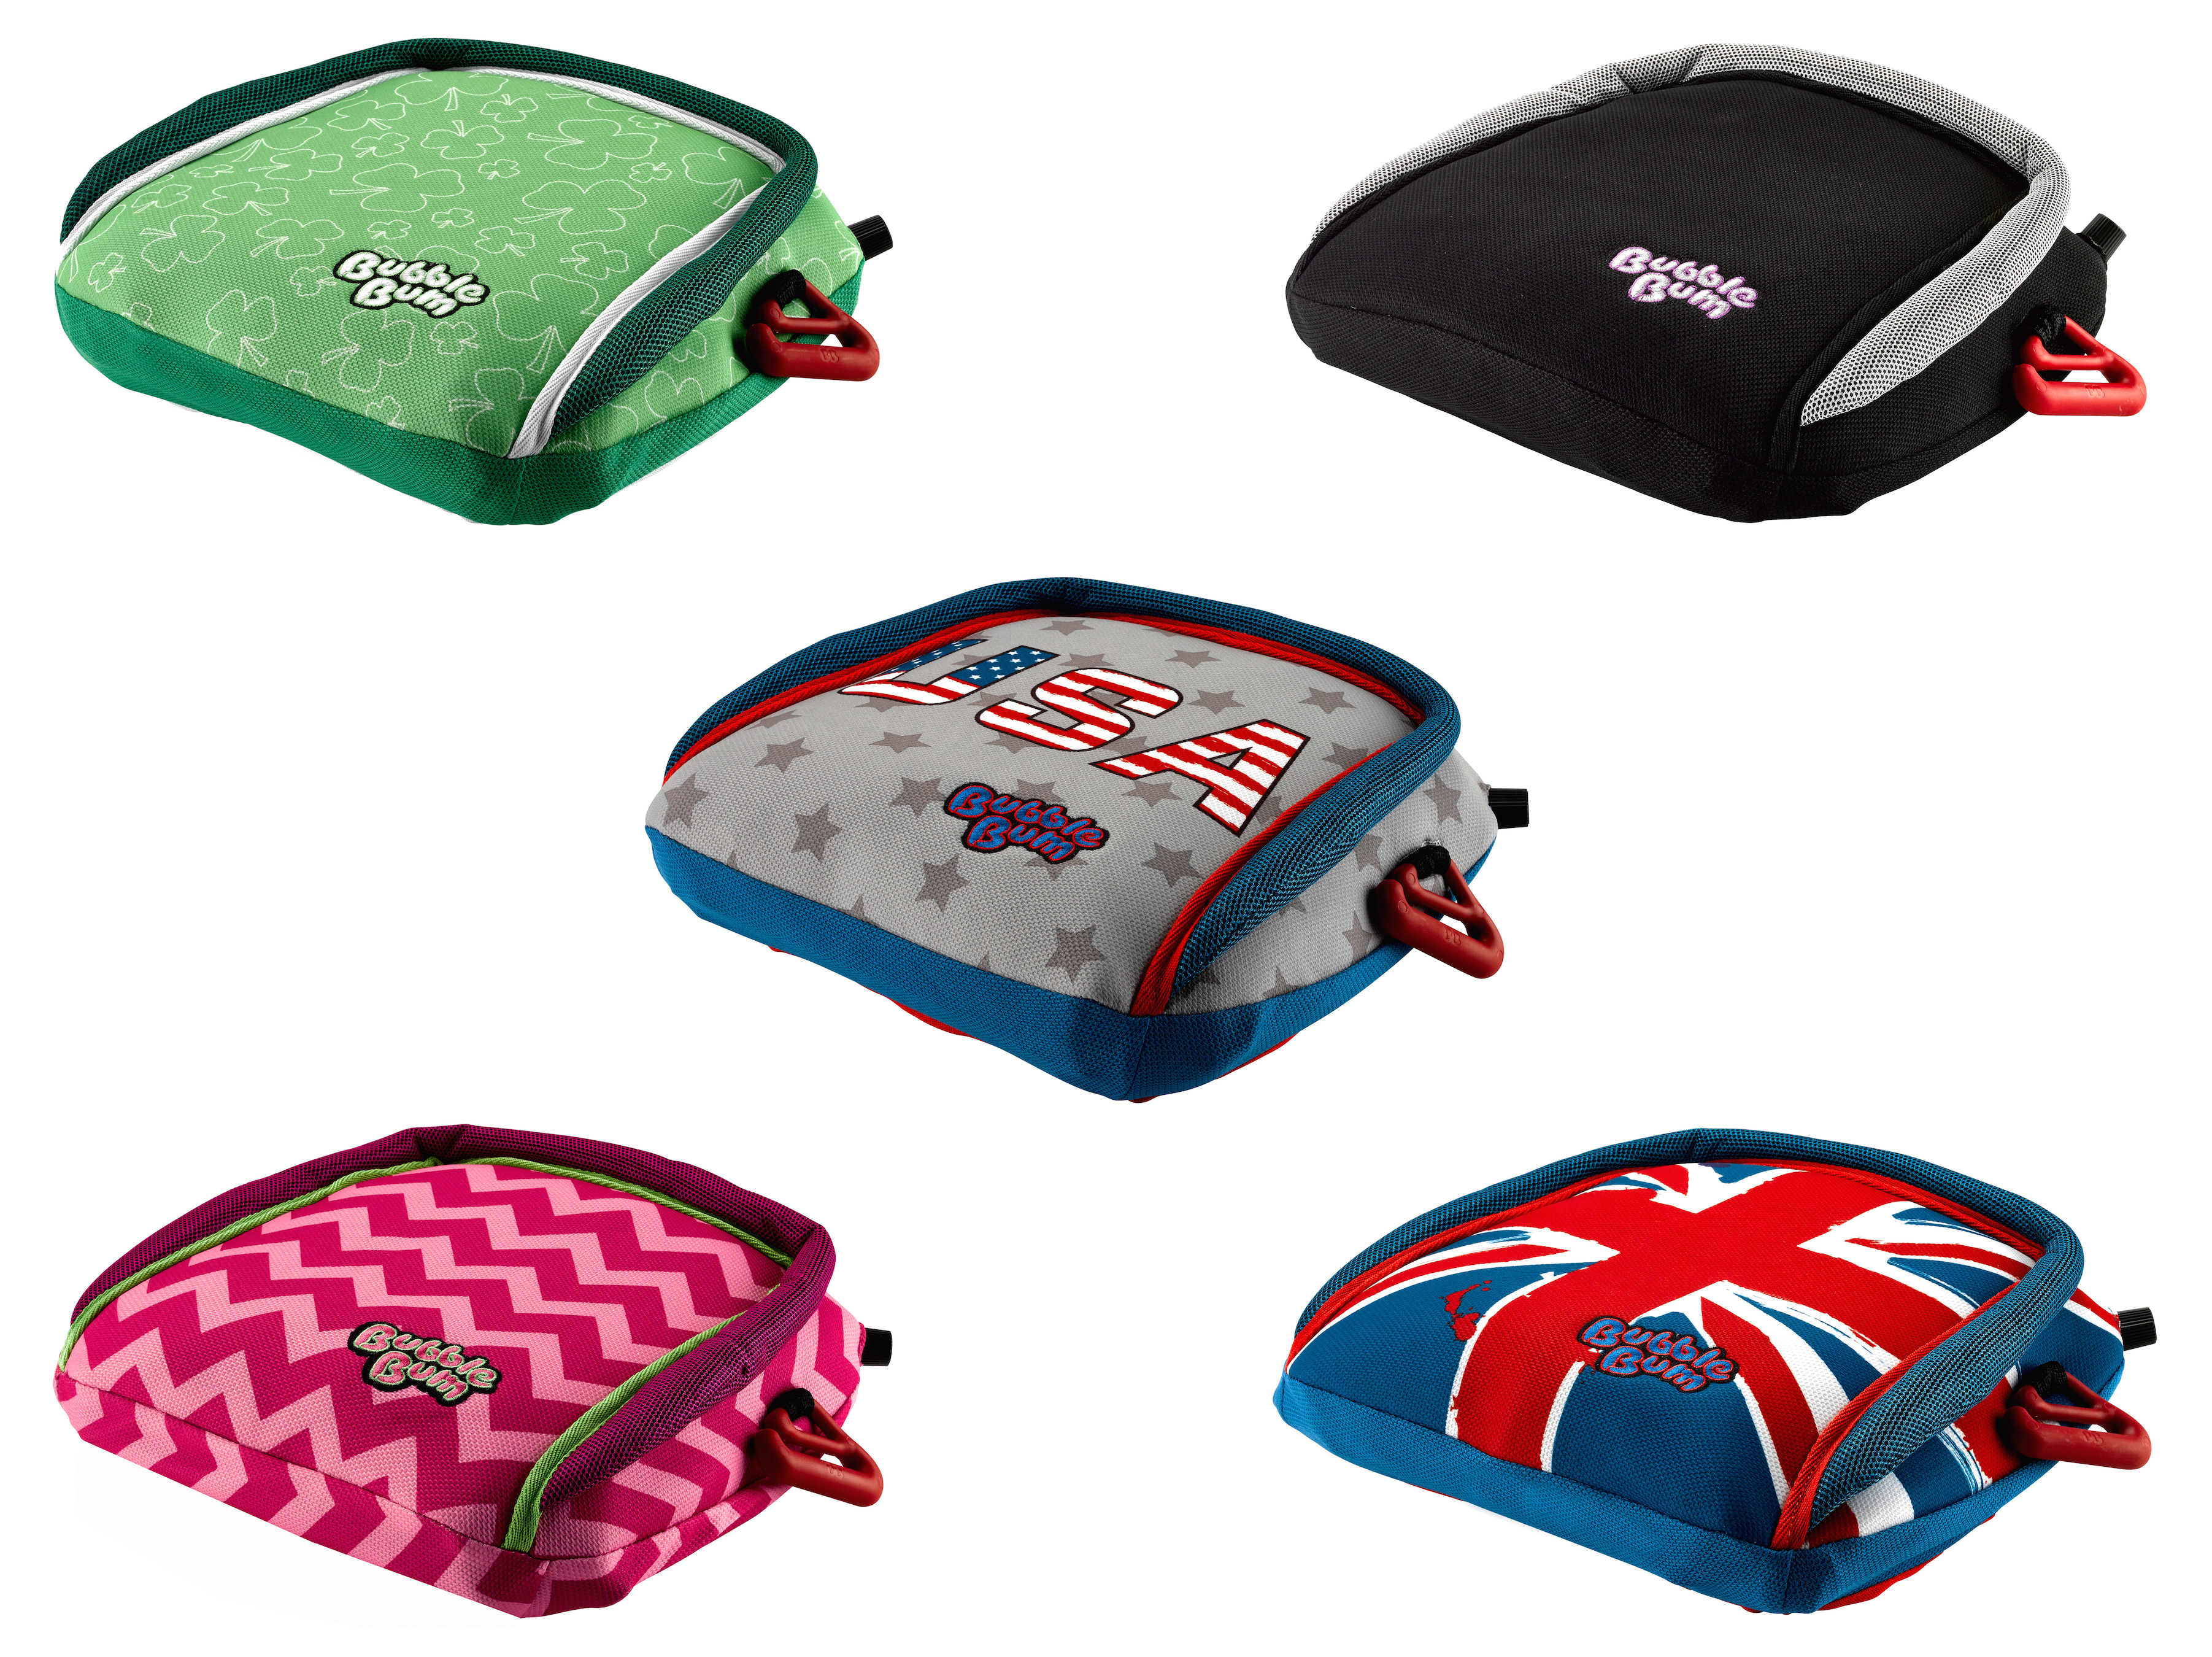 Enter To Win A BubbleBum Inflatable Car Booster Seat, A Safety Must